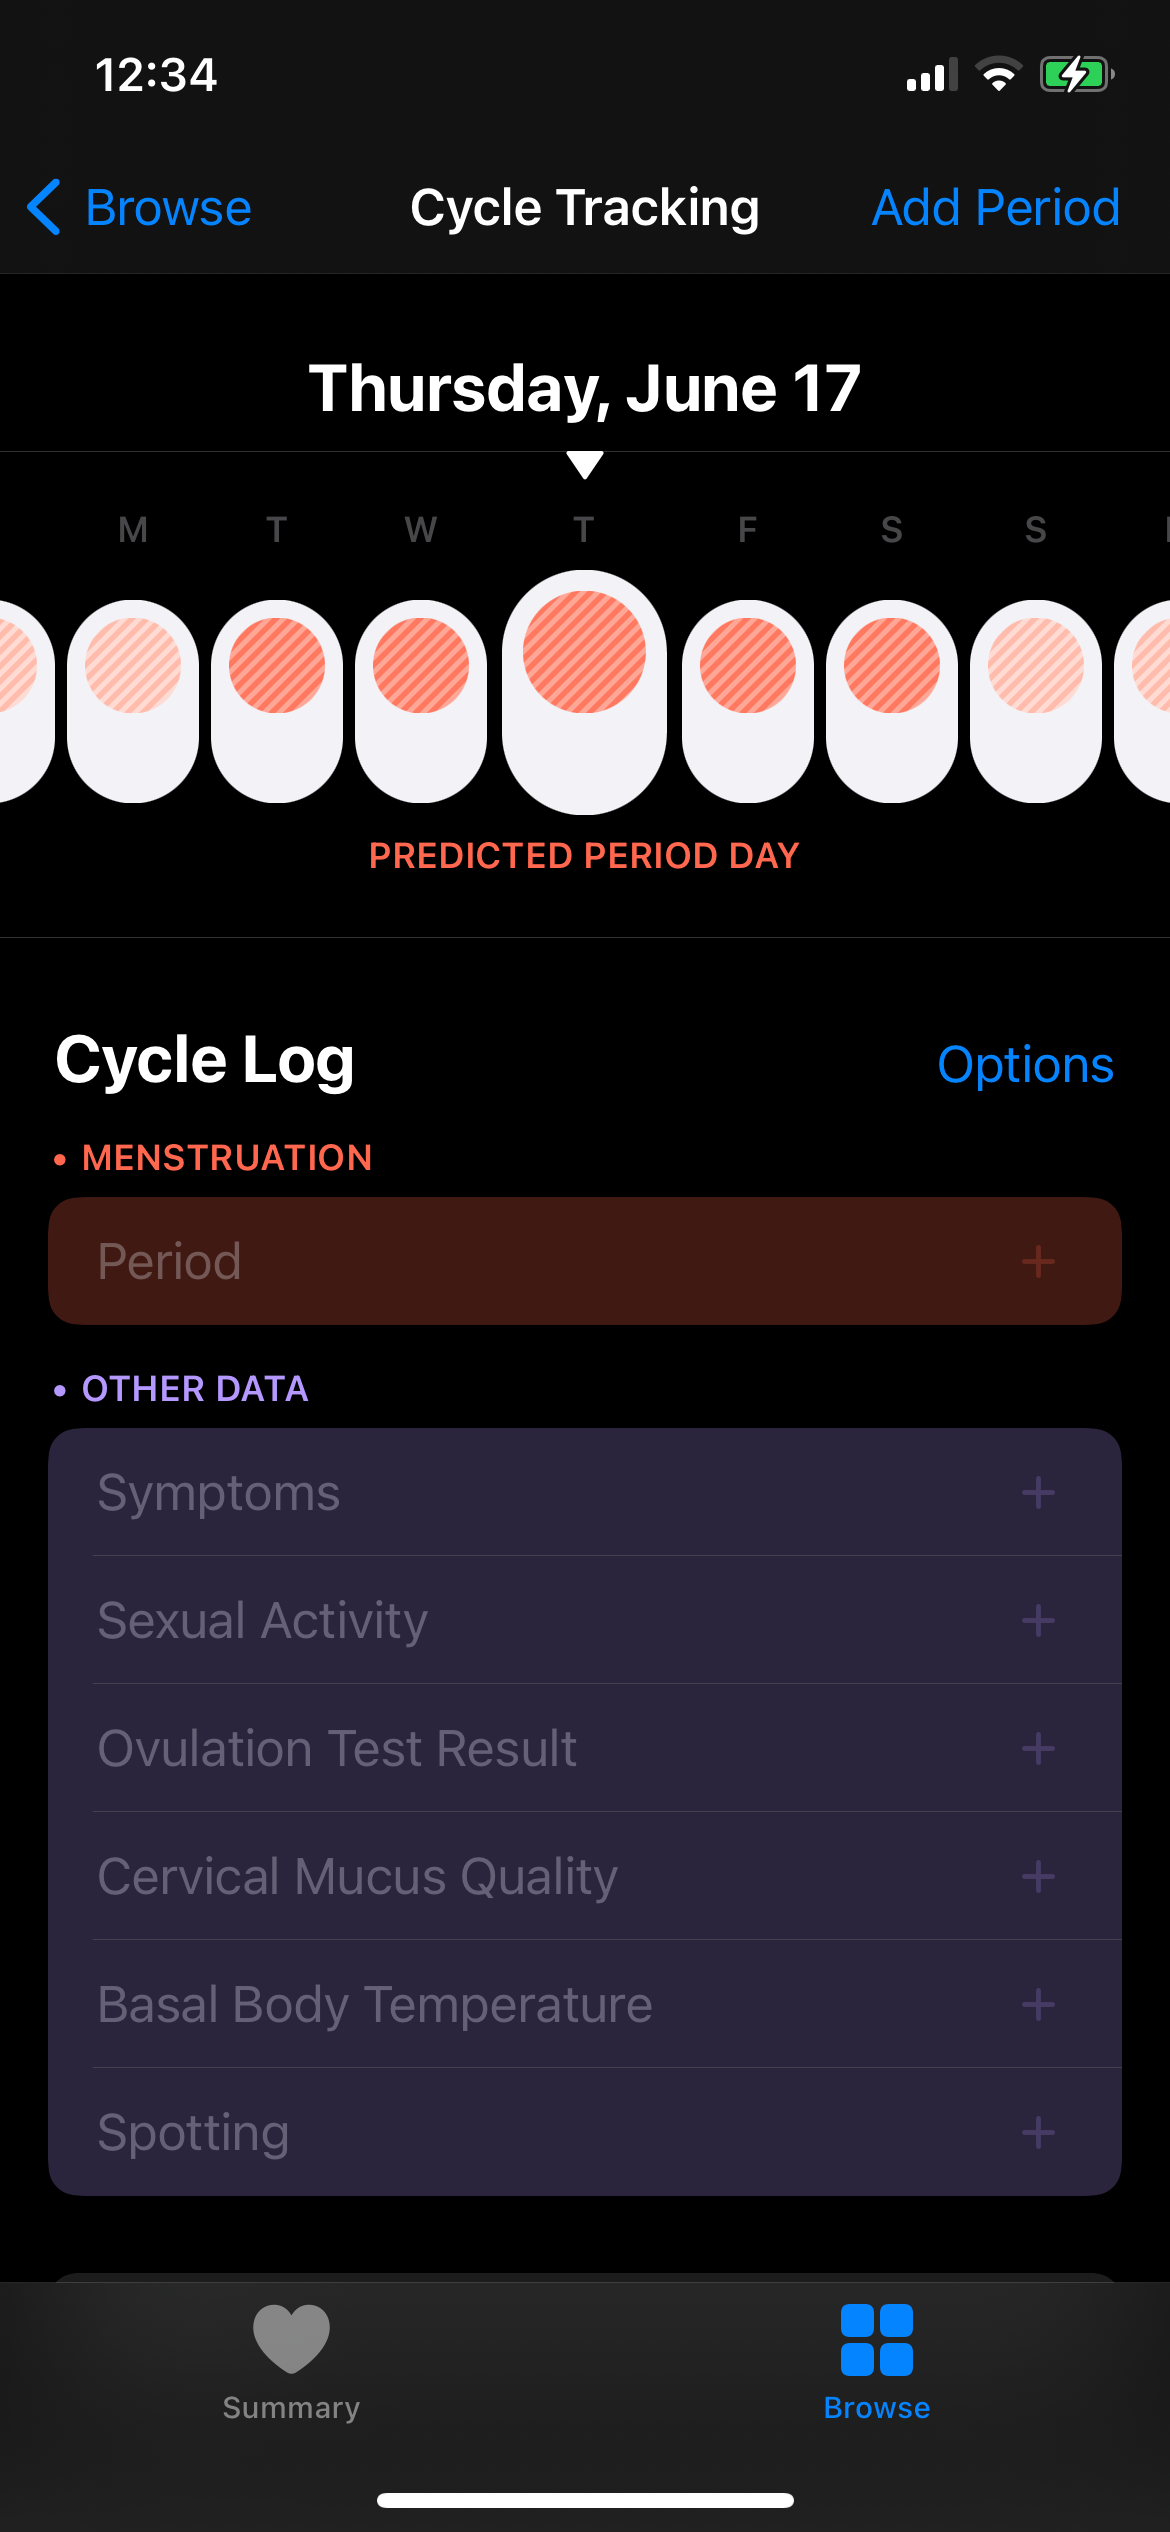 Cycle Log highlighting a predicted period day